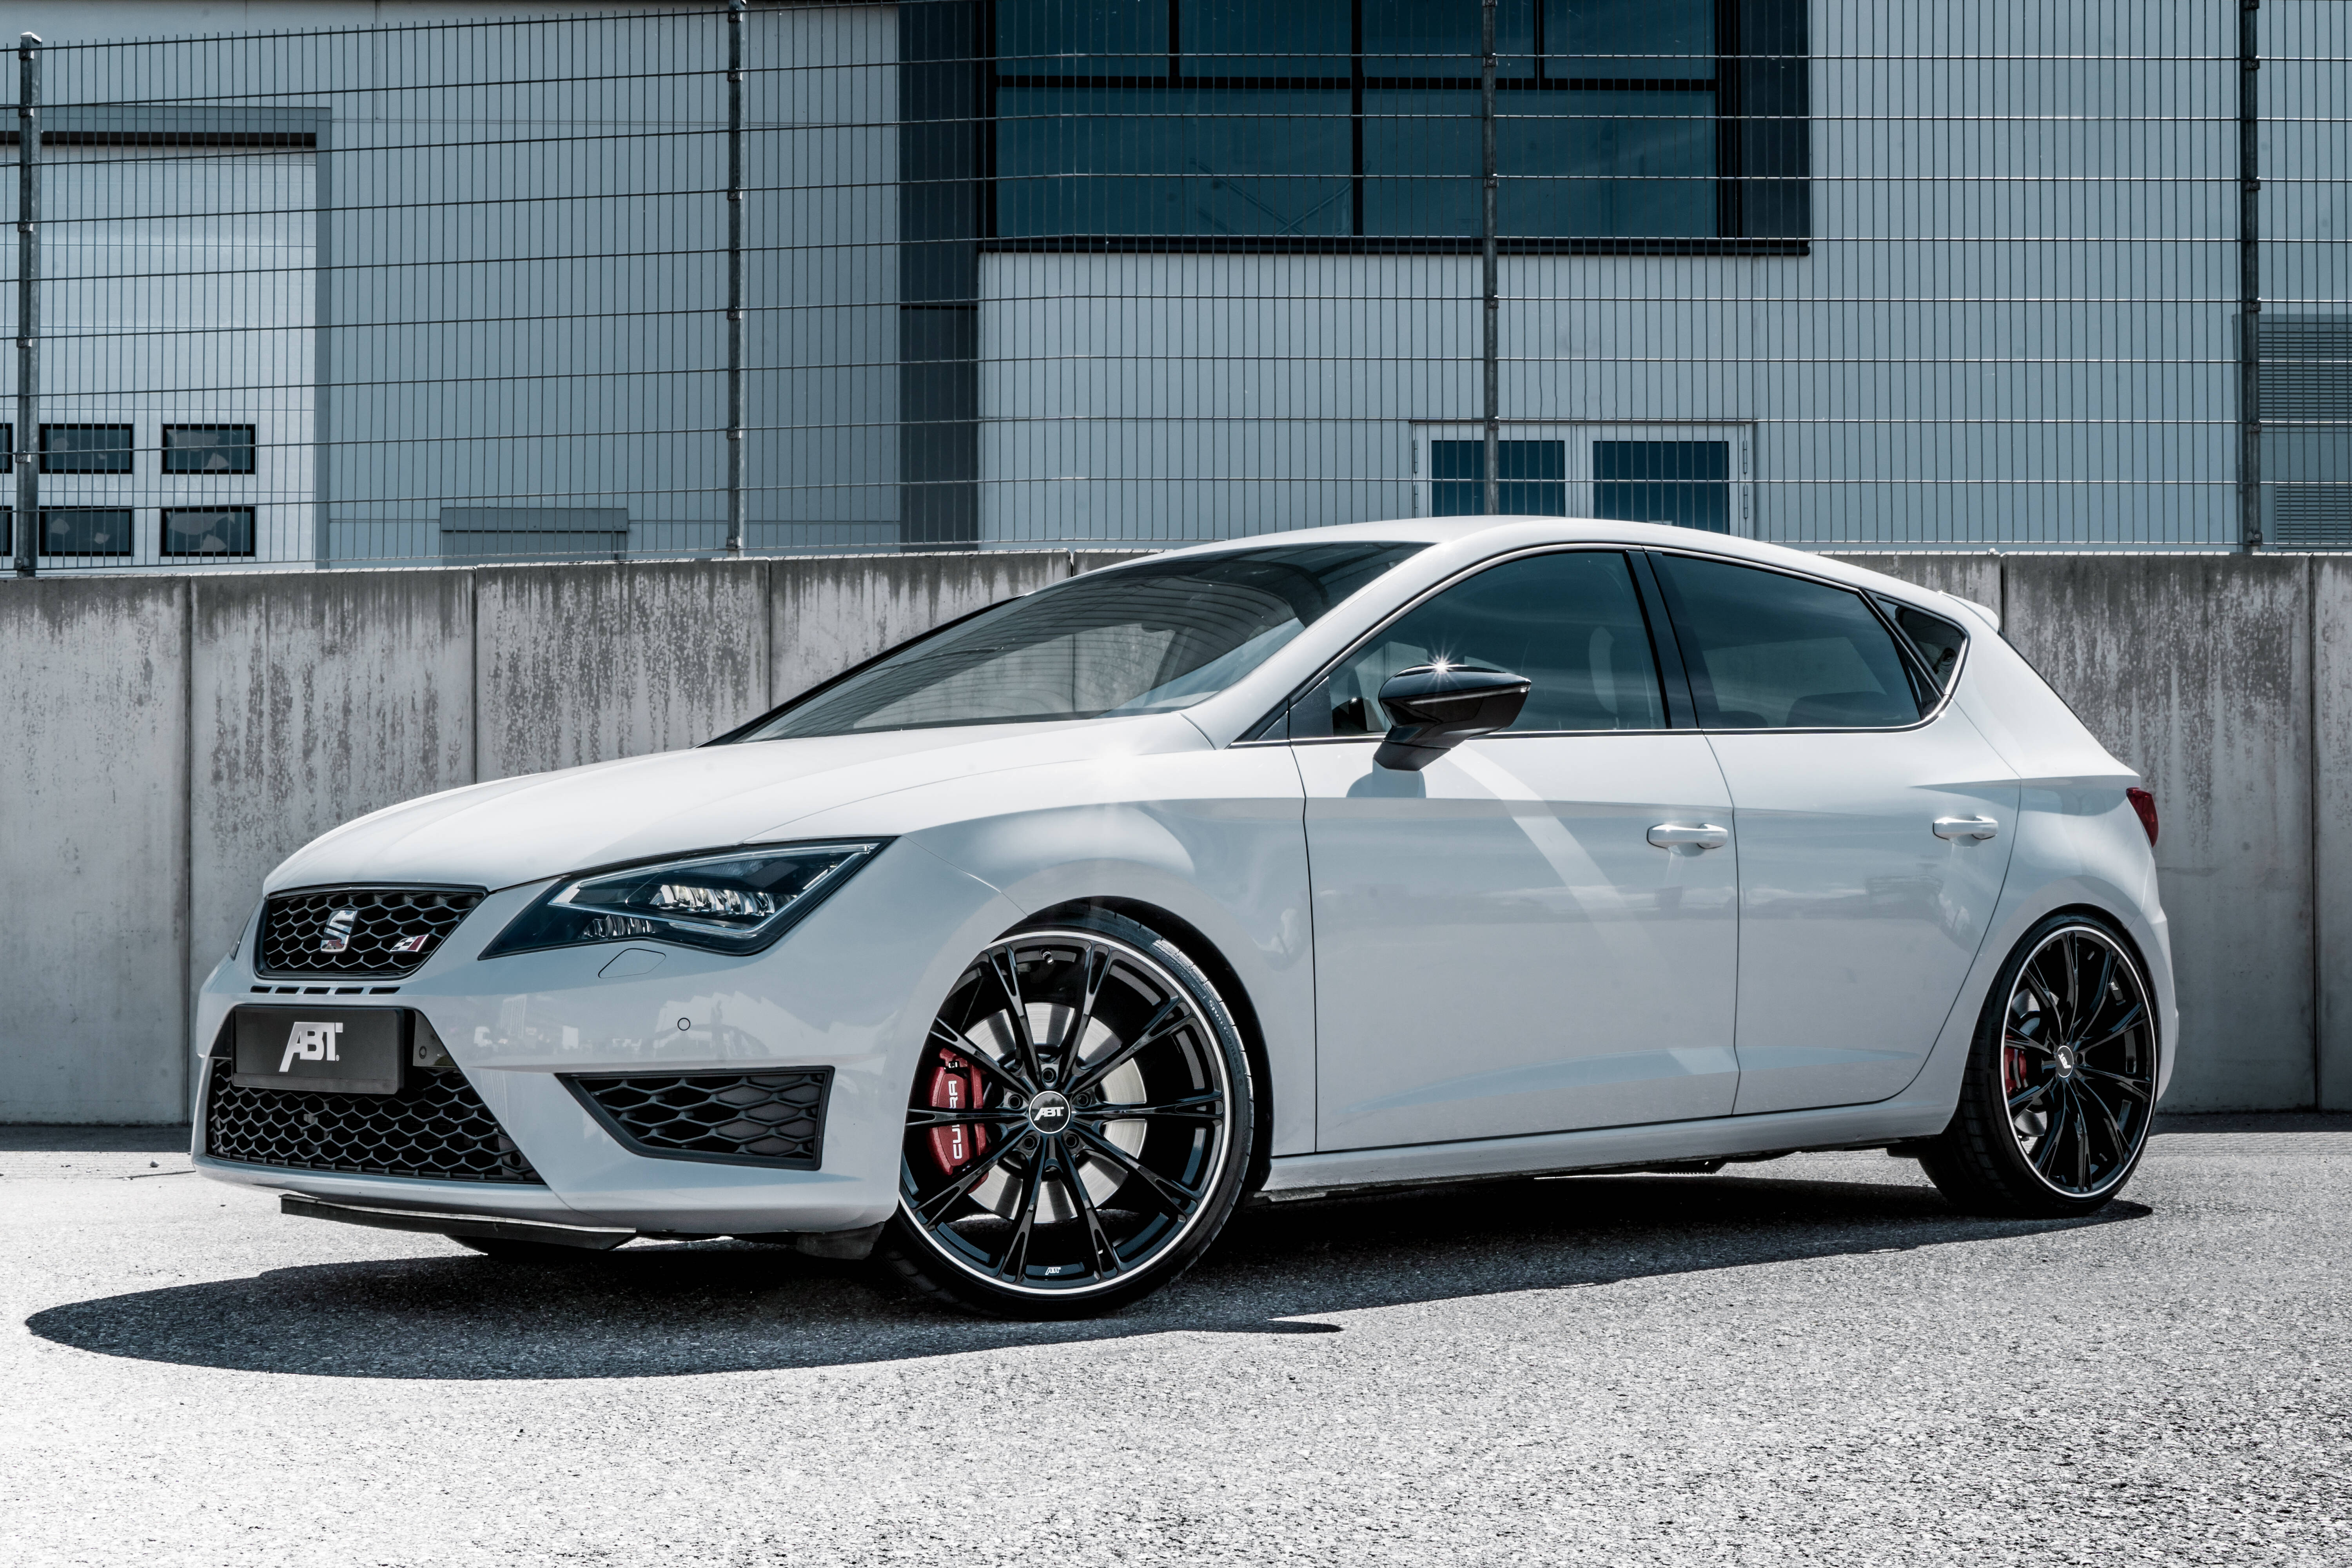 Leon King: ABT mobilizes 370 HP in the ST CUPRA 300 Carbon